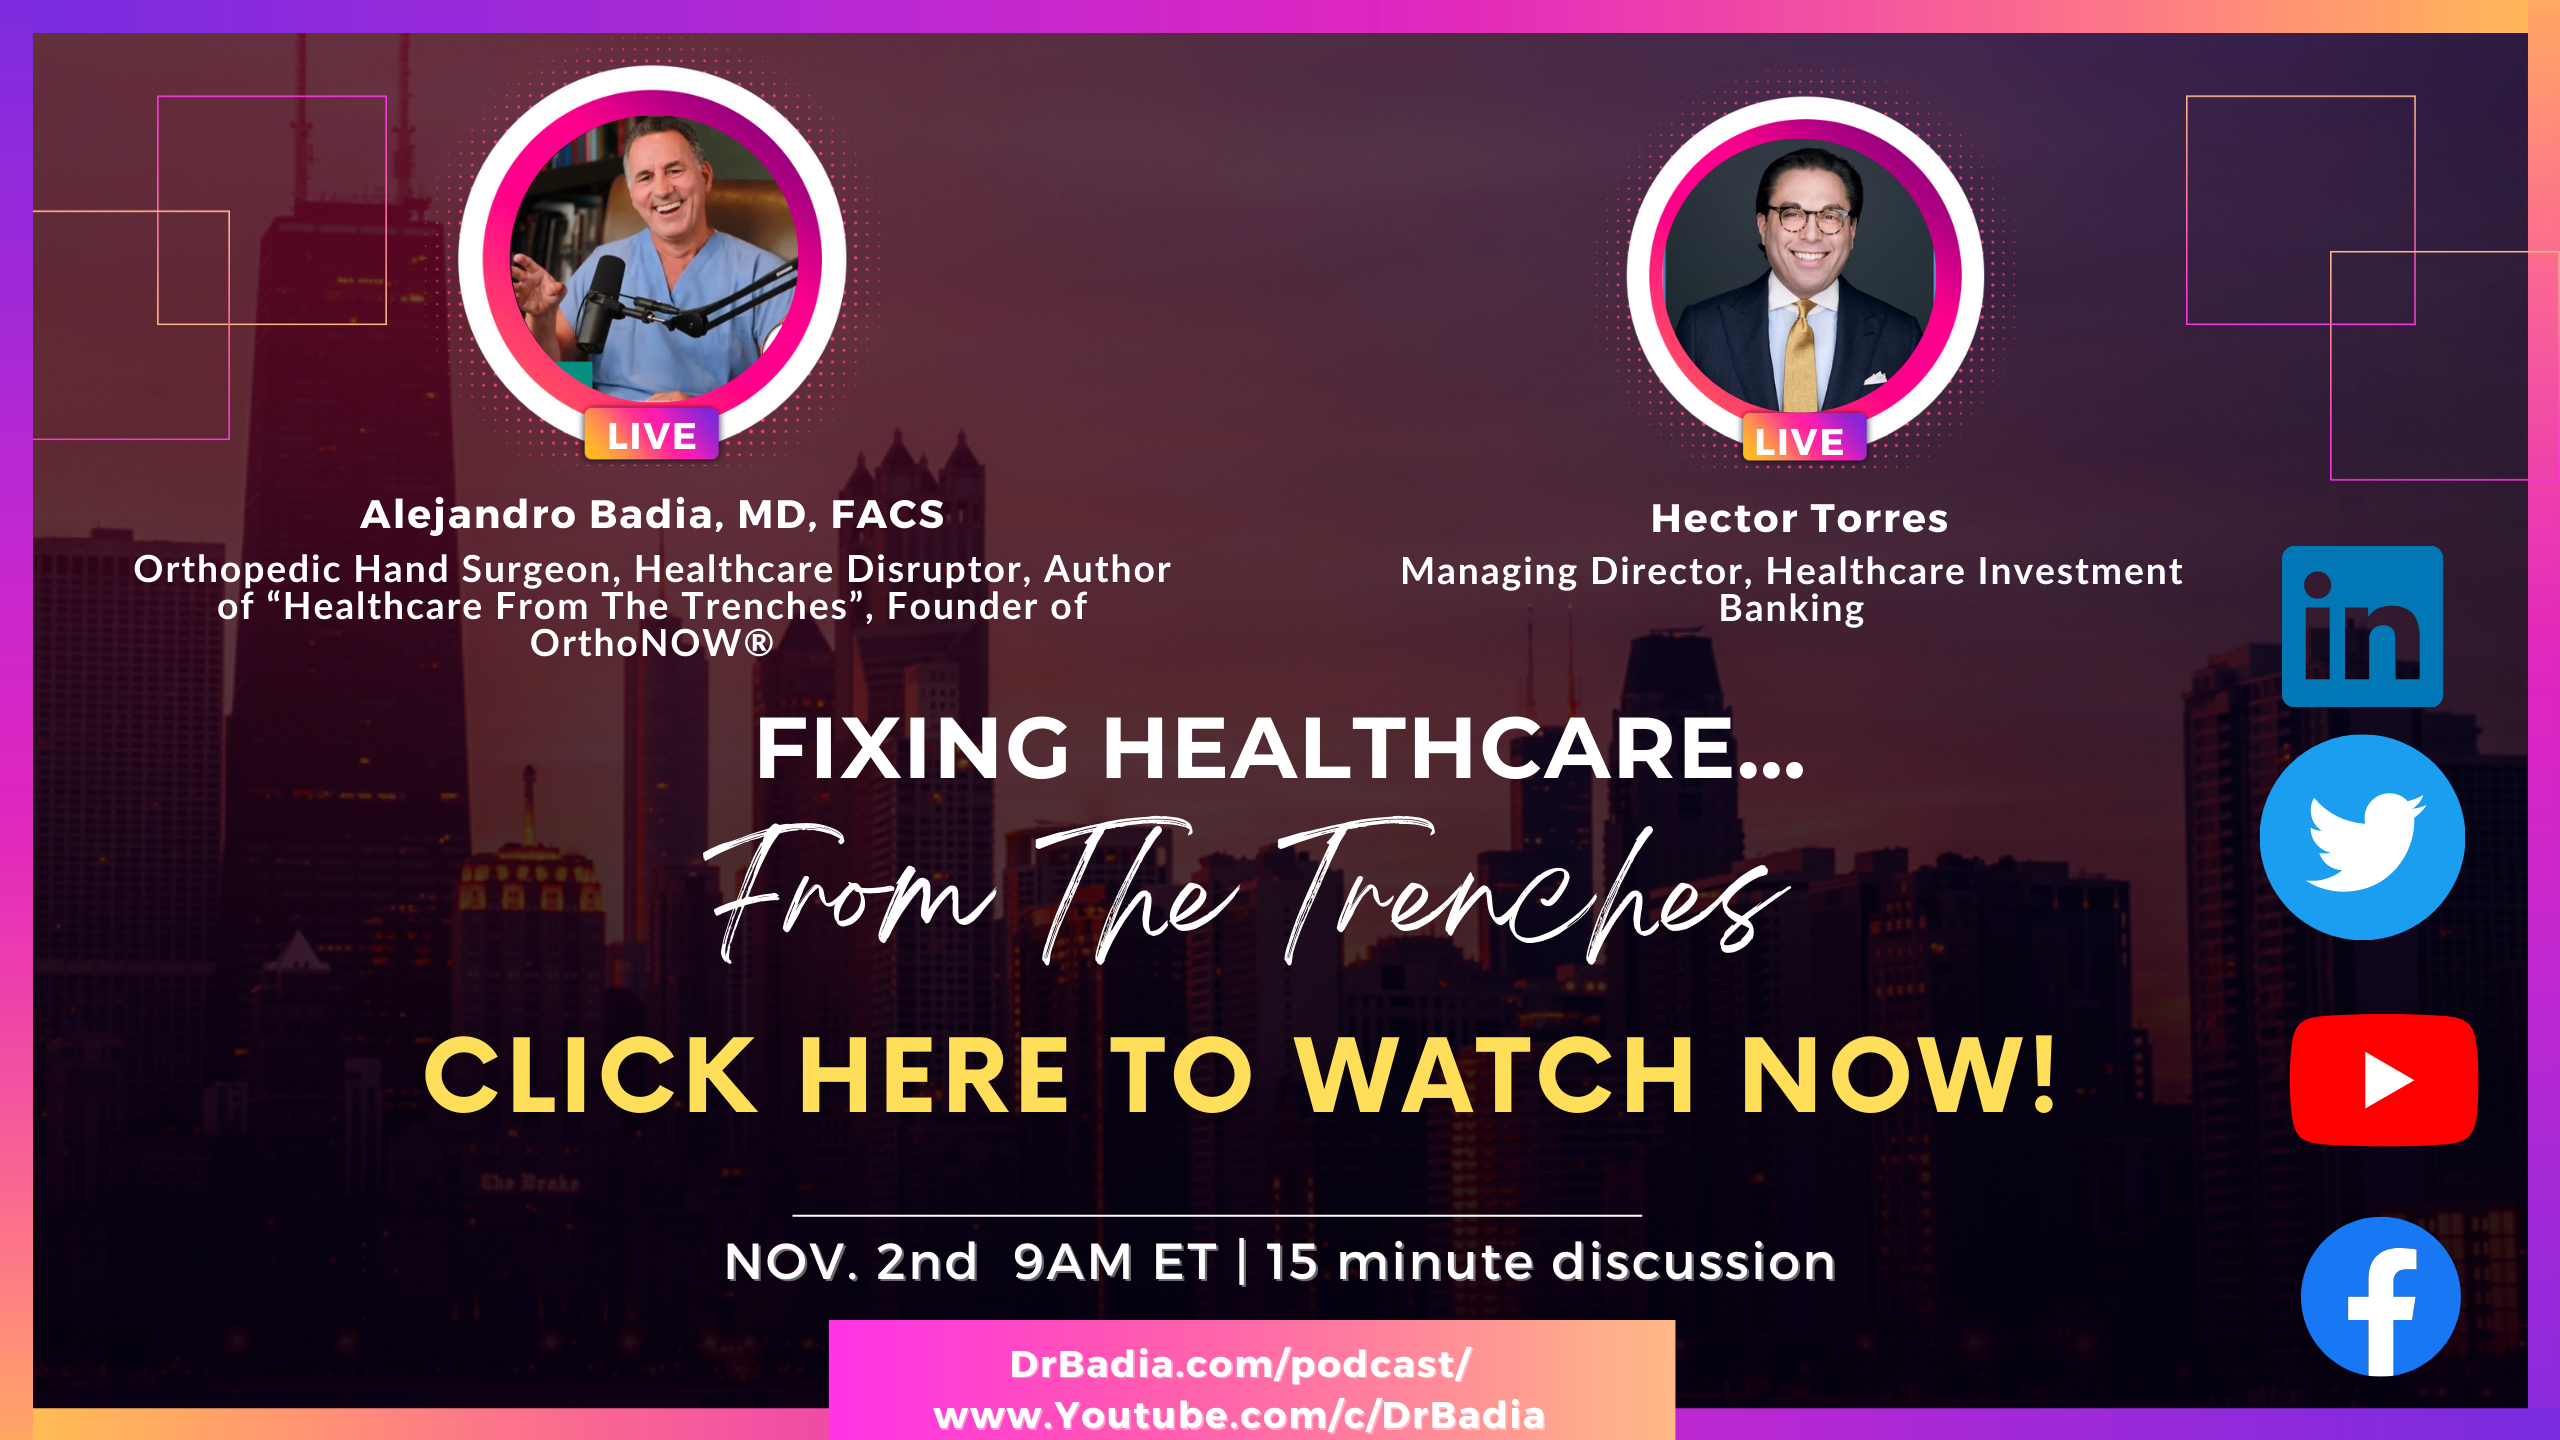 Episode 23 Fixing Healthcare...From The Trenches